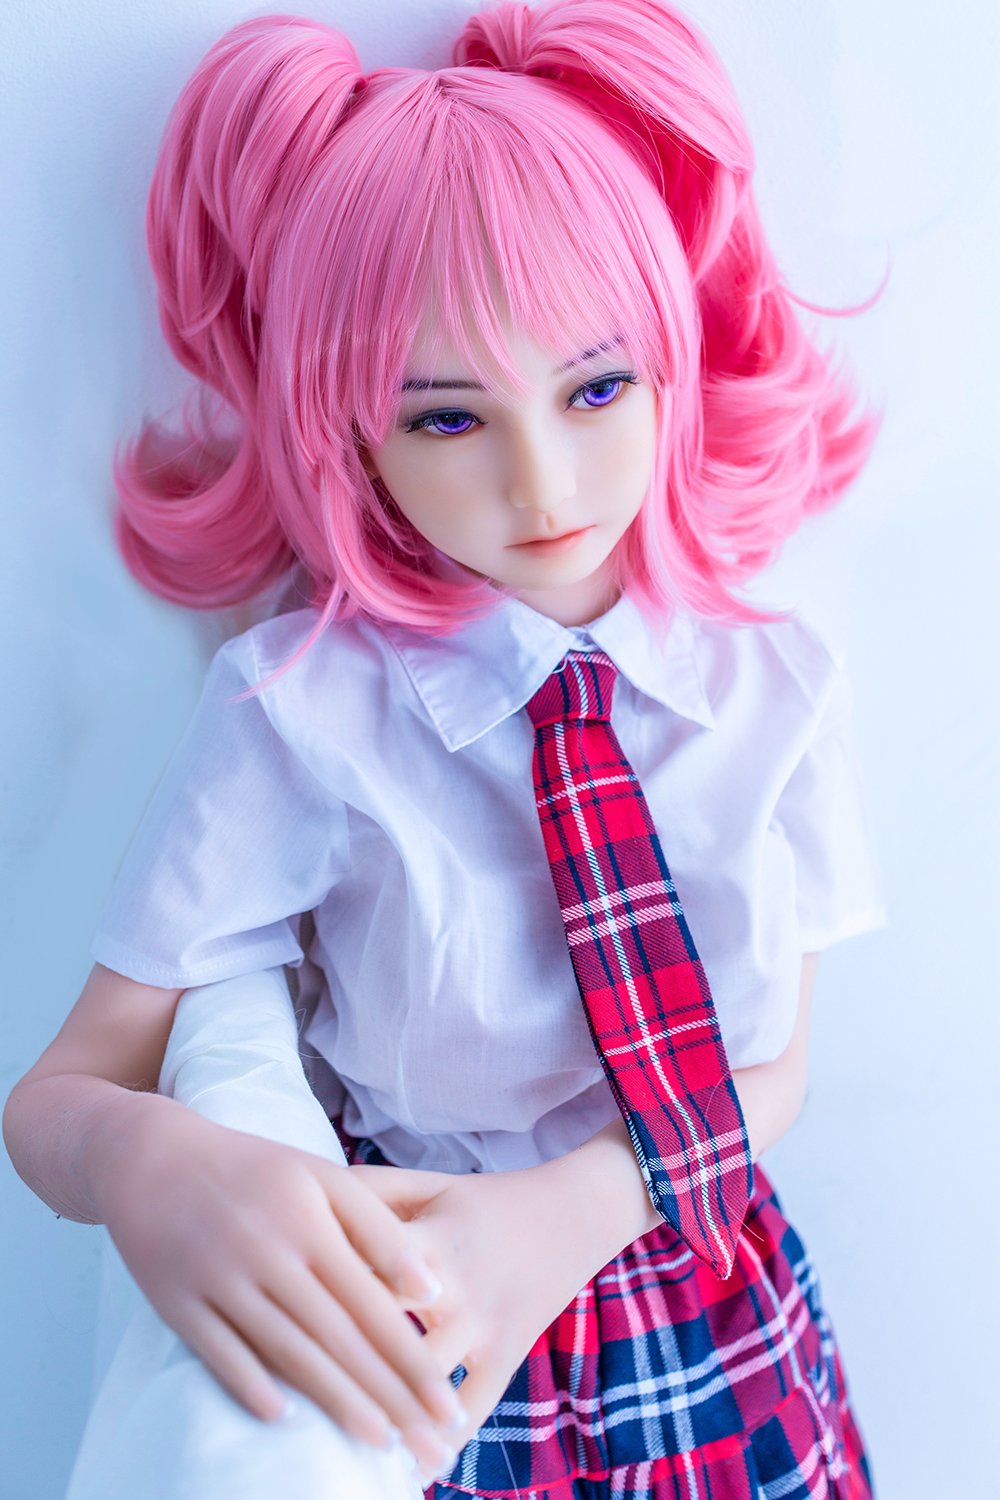 Olive - Lovely Girl with JK Uniform Real Sex Doll